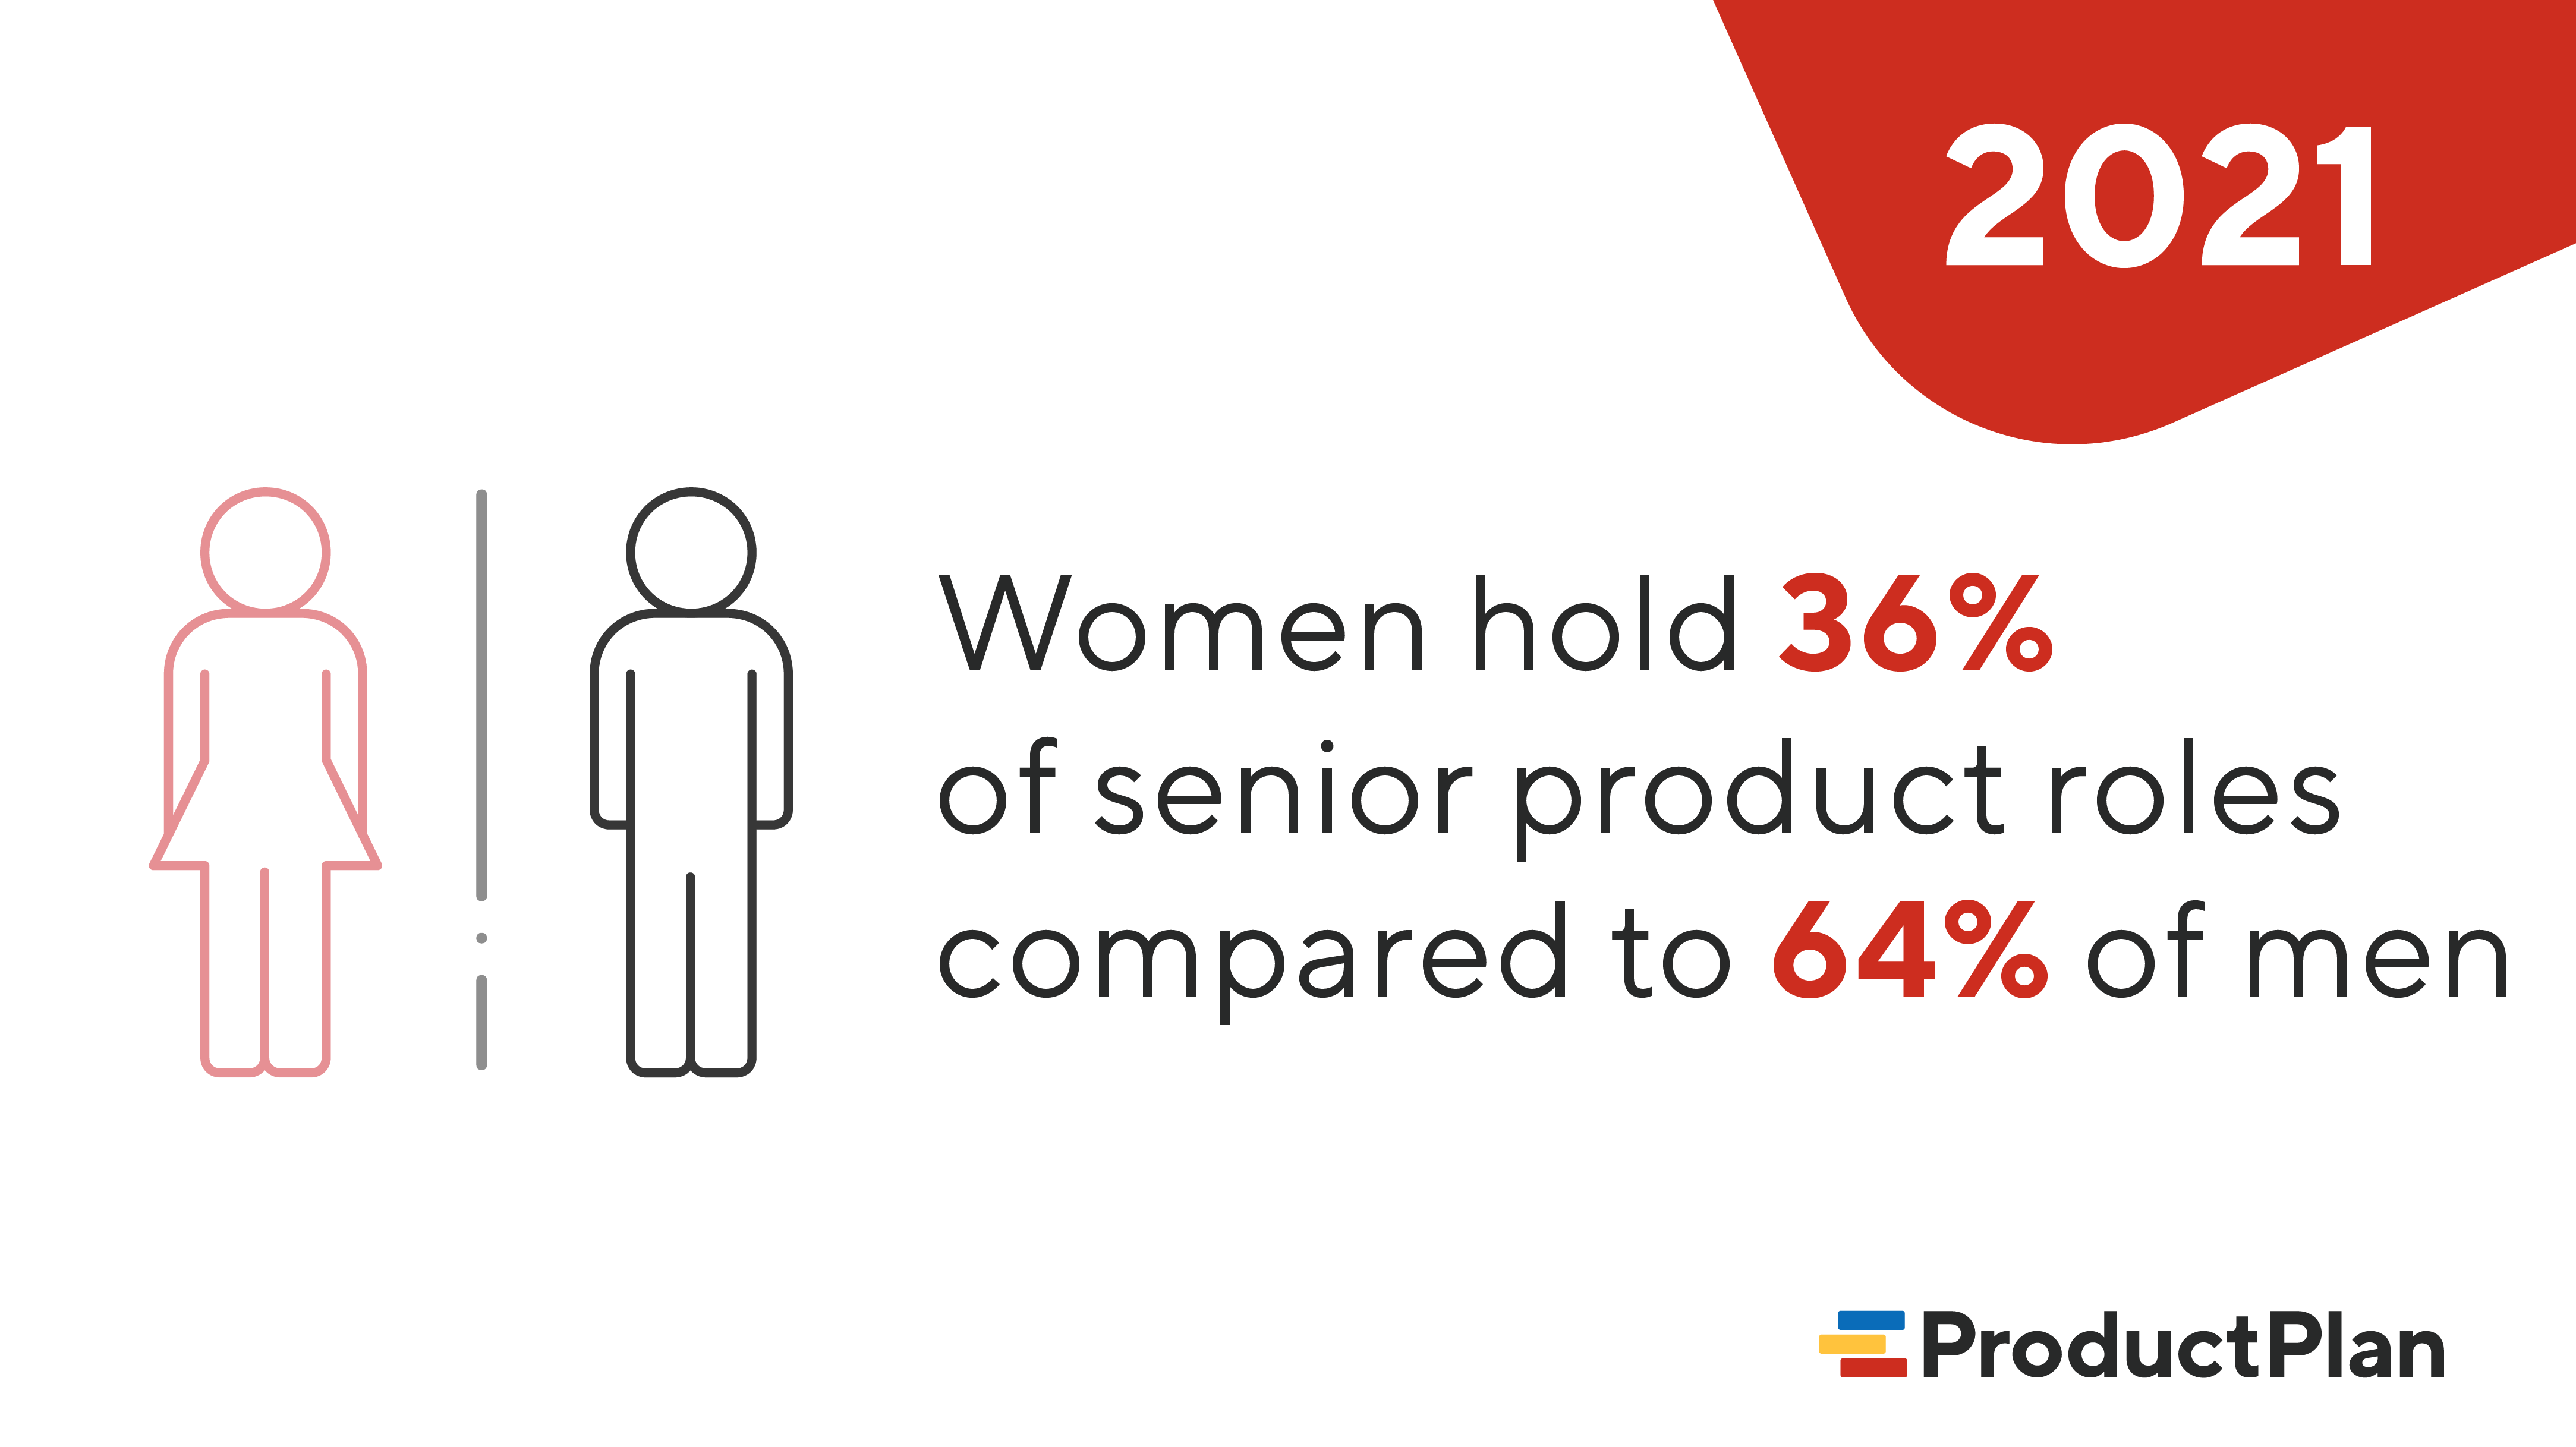 Gender discrepancies, women hold only 36 percent of senior product management roles